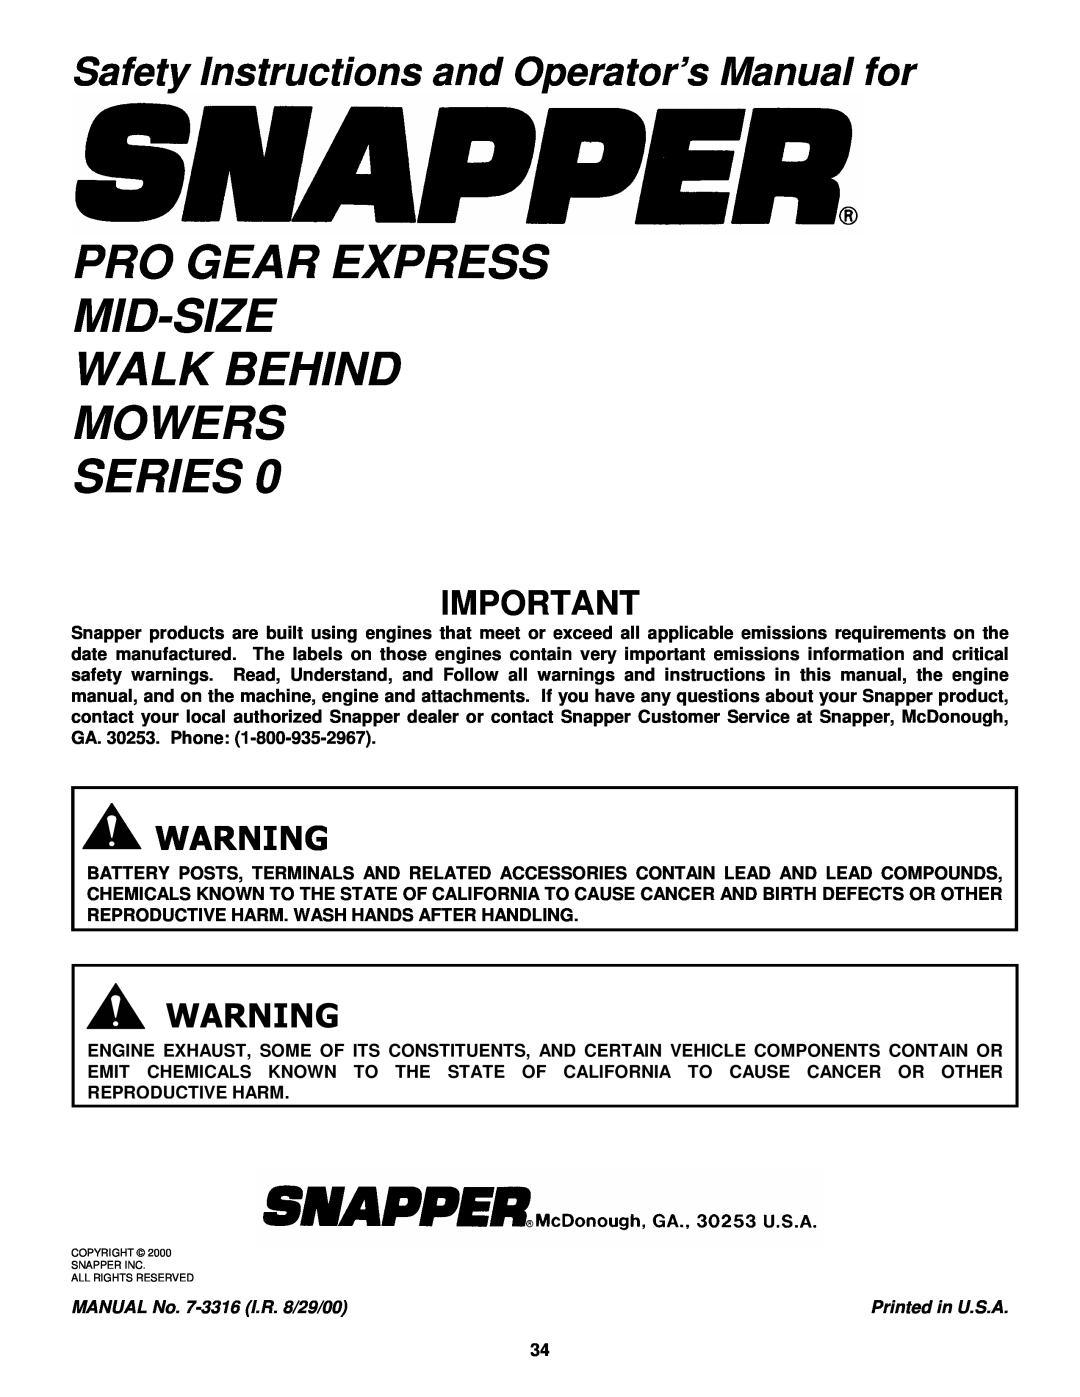 Snapper SPE481, SPE361 Pro Gear Express Mid-Size Walk Behind Mowers Series, Safety Instructions and Operator’s Manual for 